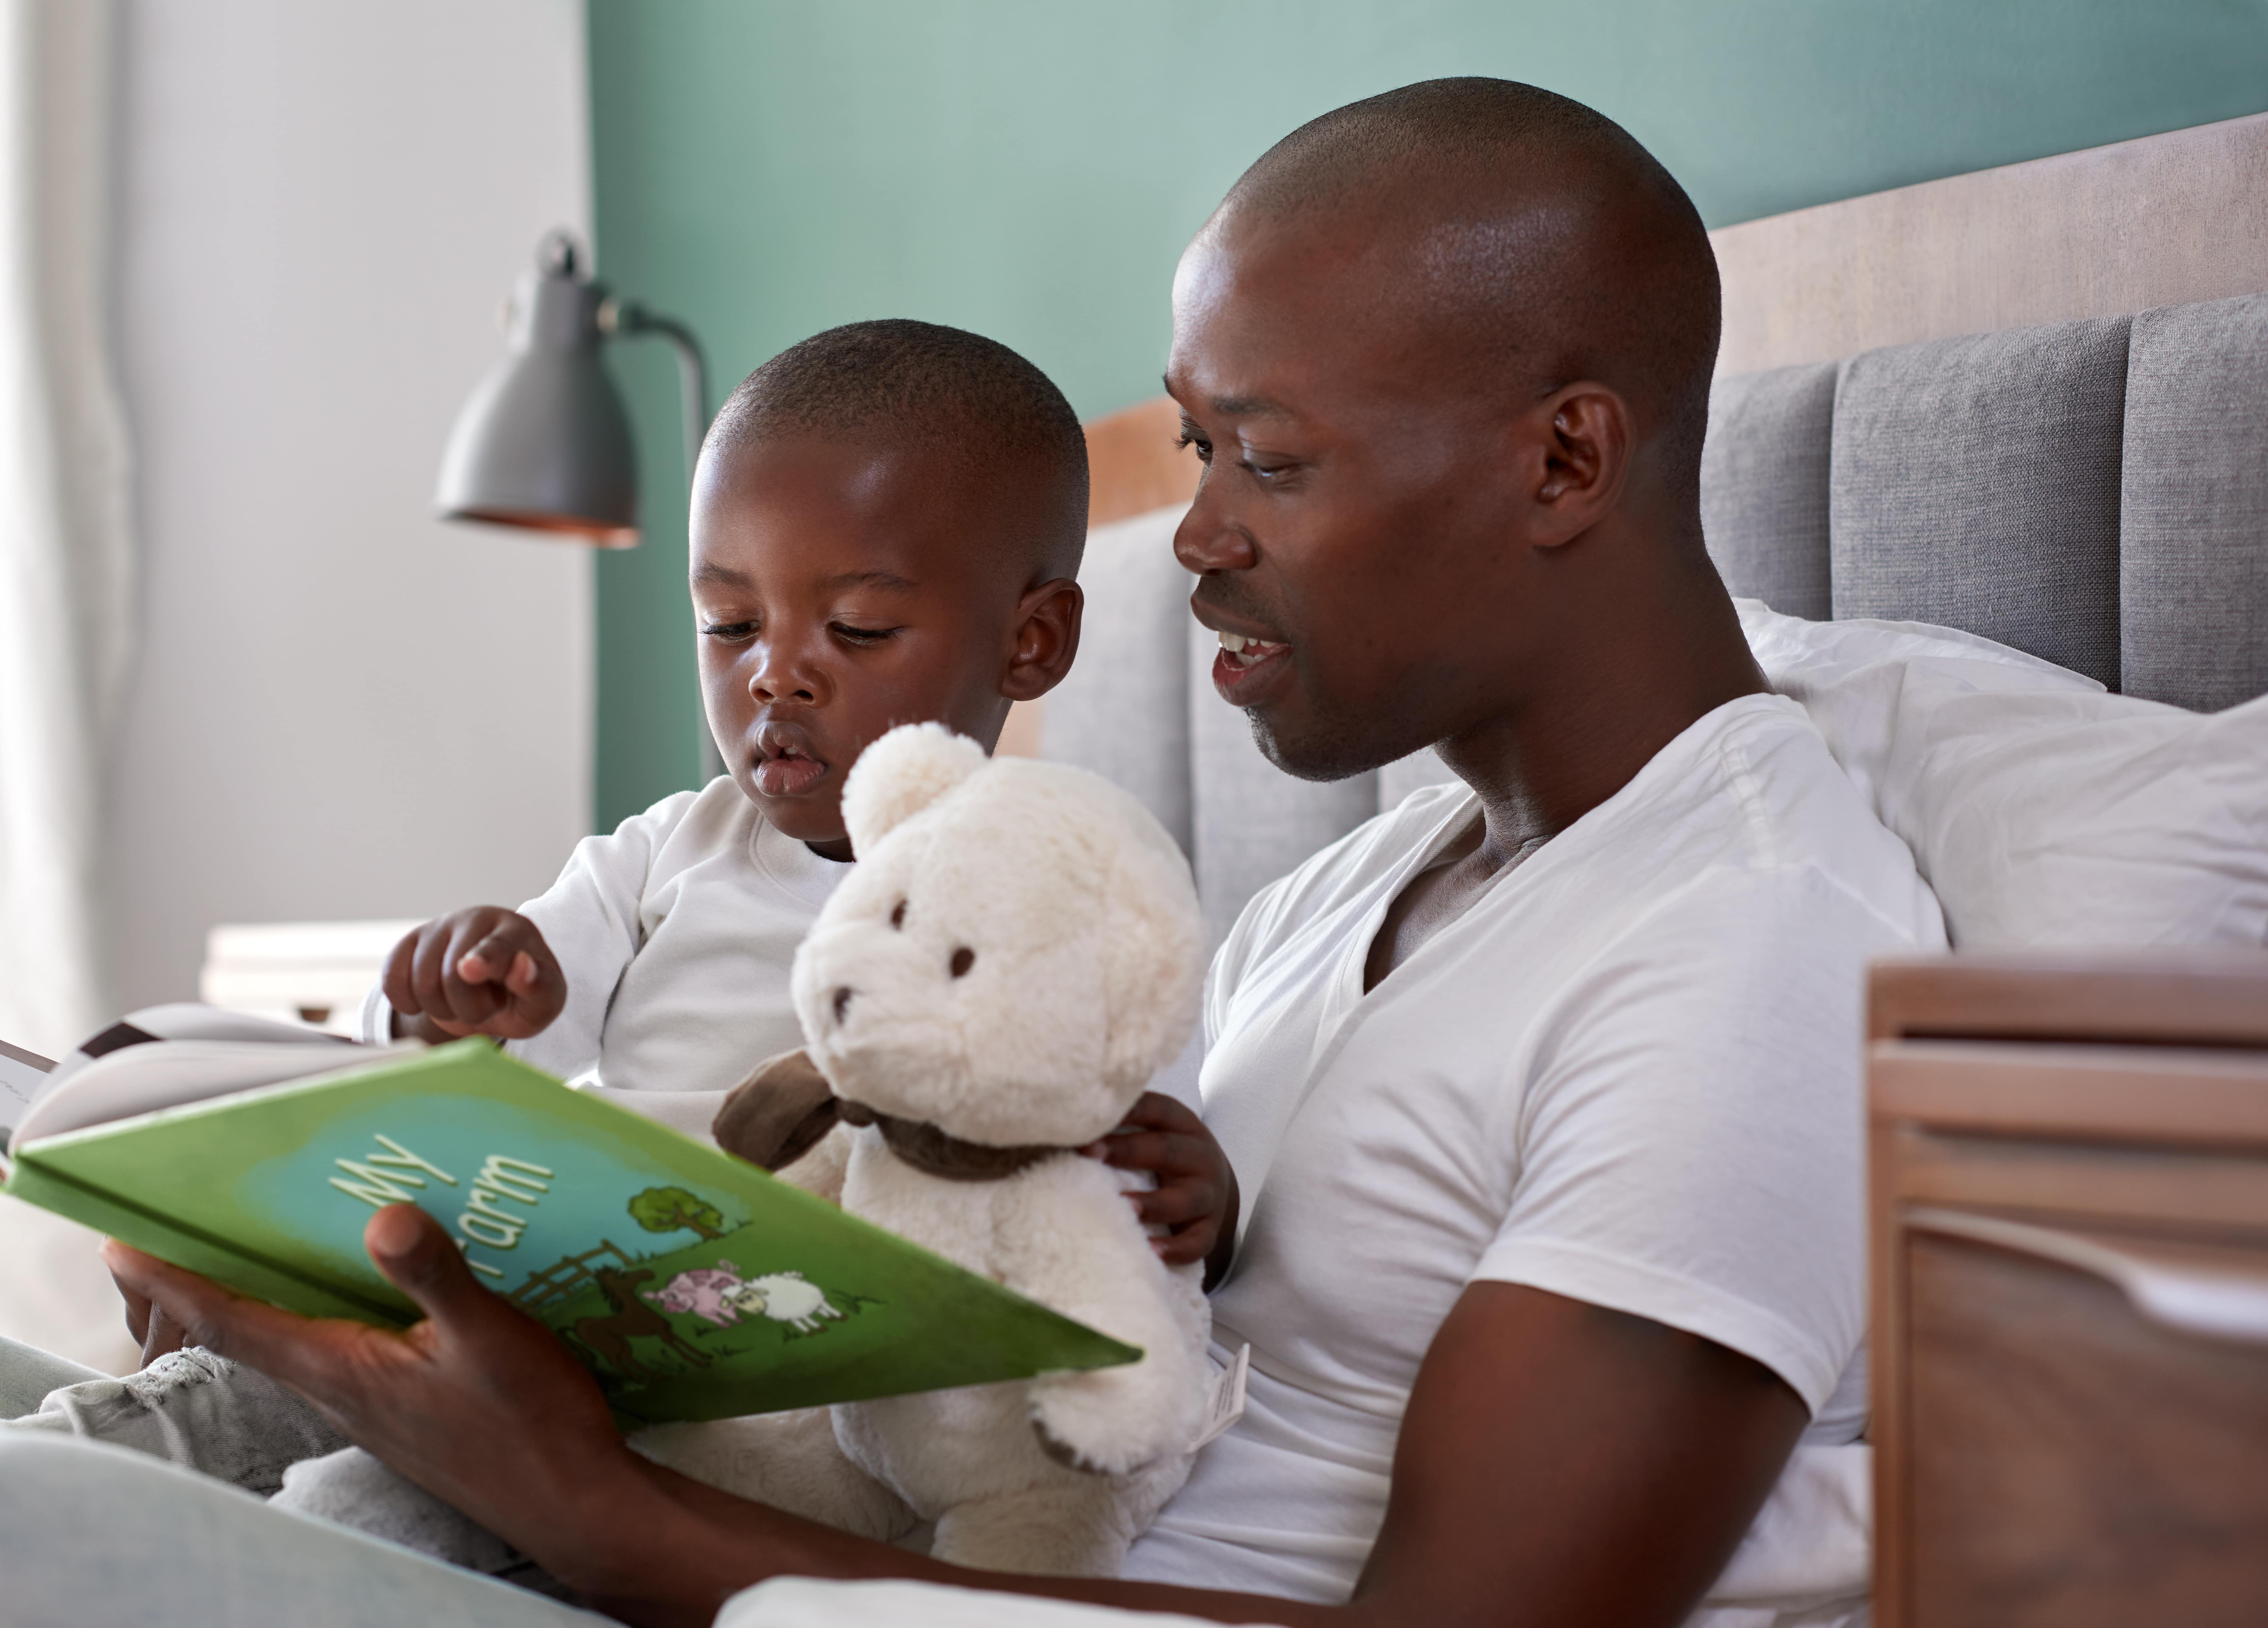 A dad and son reading a colourful picture book called My Farm in bed. They are cuddled close together and enjoying some one to one time together.